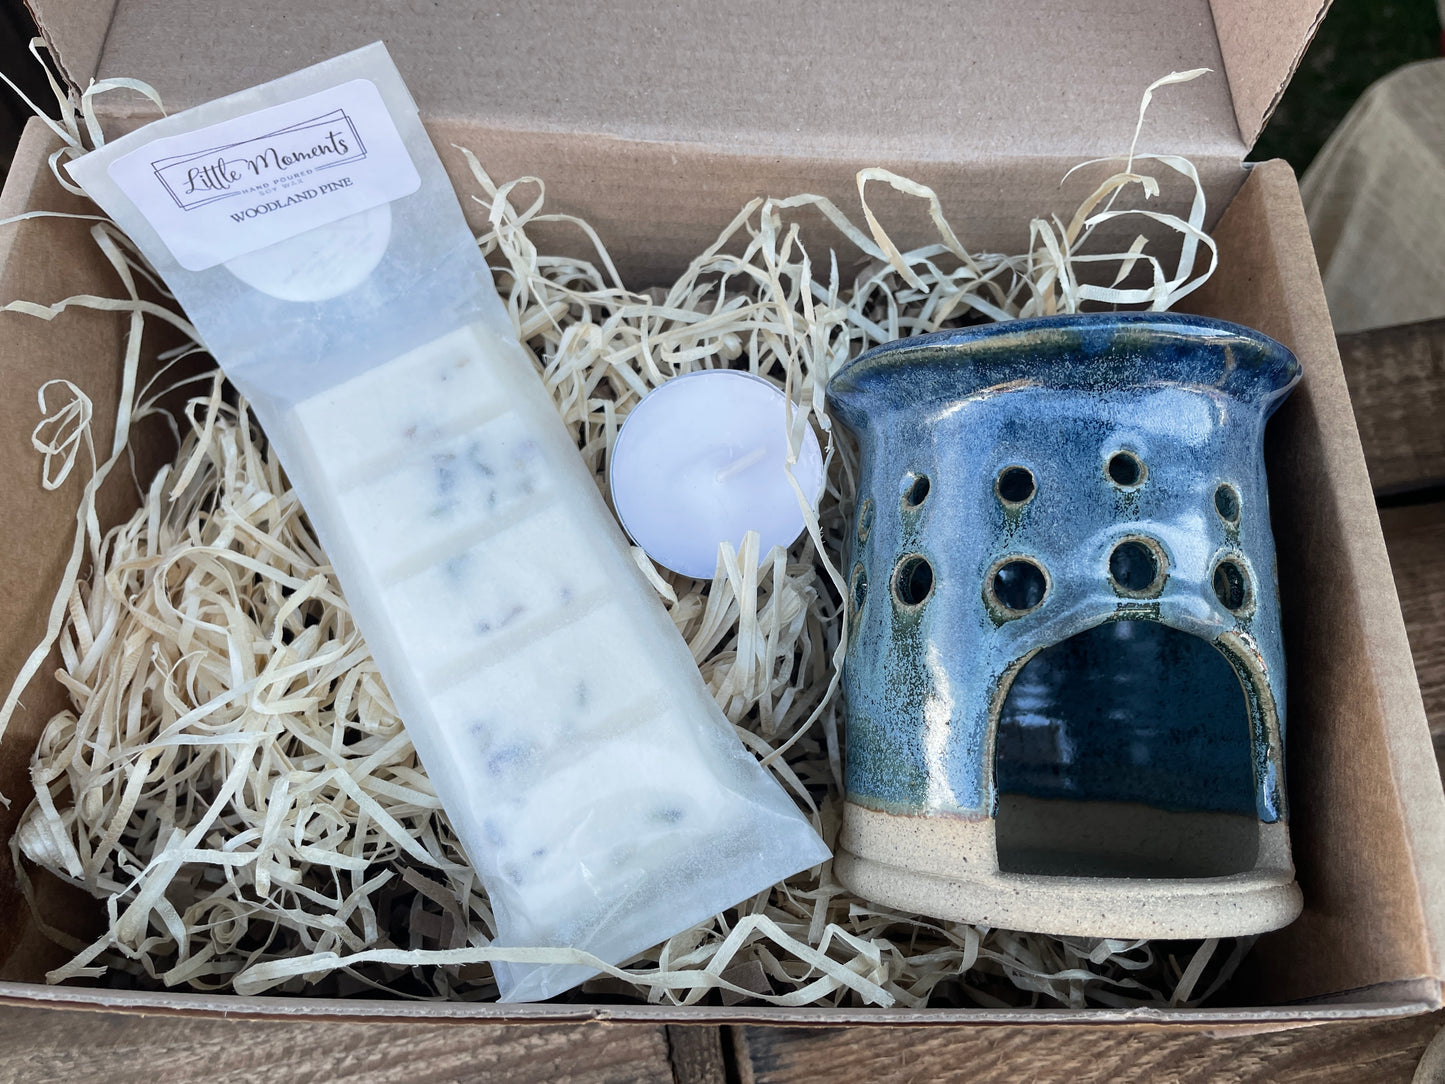 unique hand made pottery wax melt burner in a gift box with a bar of soy wax snap bar